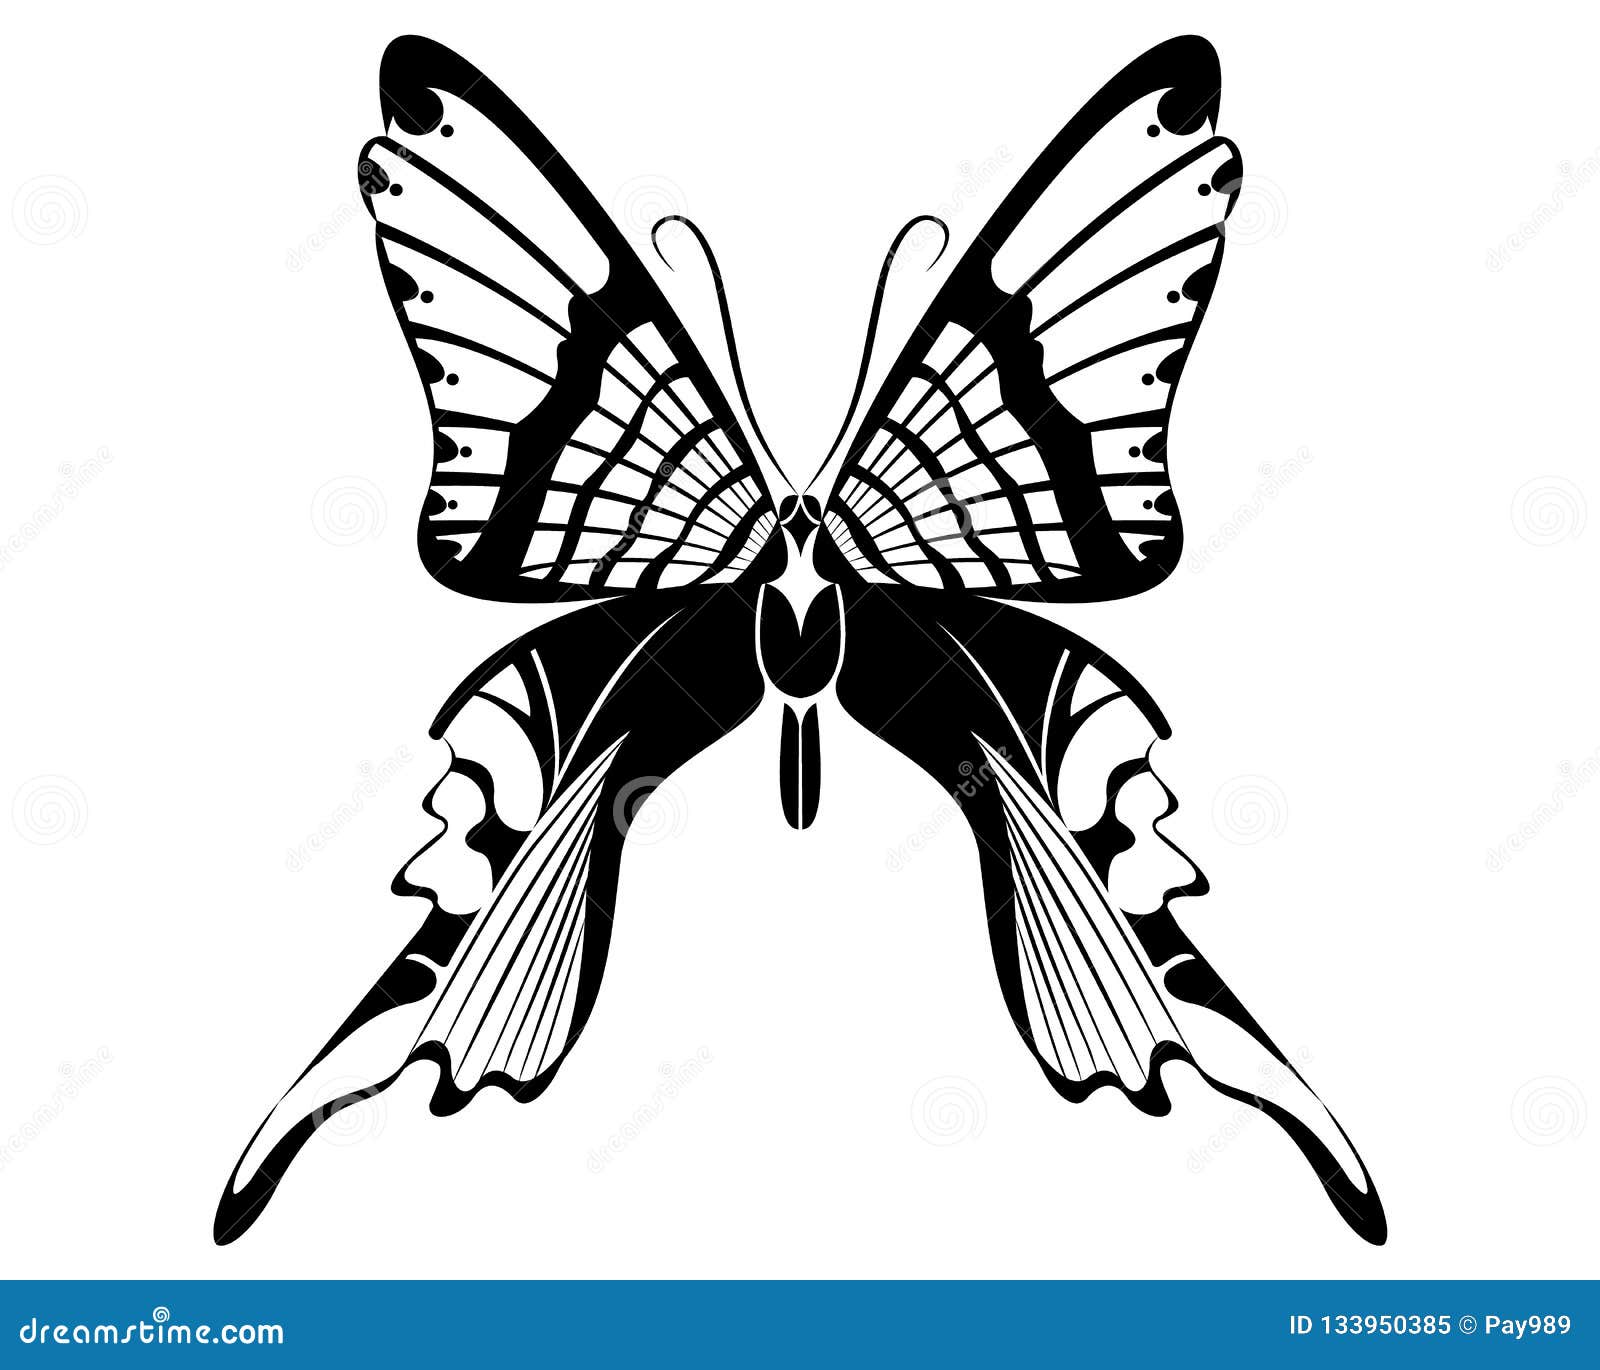 butterfly black white silhouette design stock illustration illustration of beautiful abstract 133950385